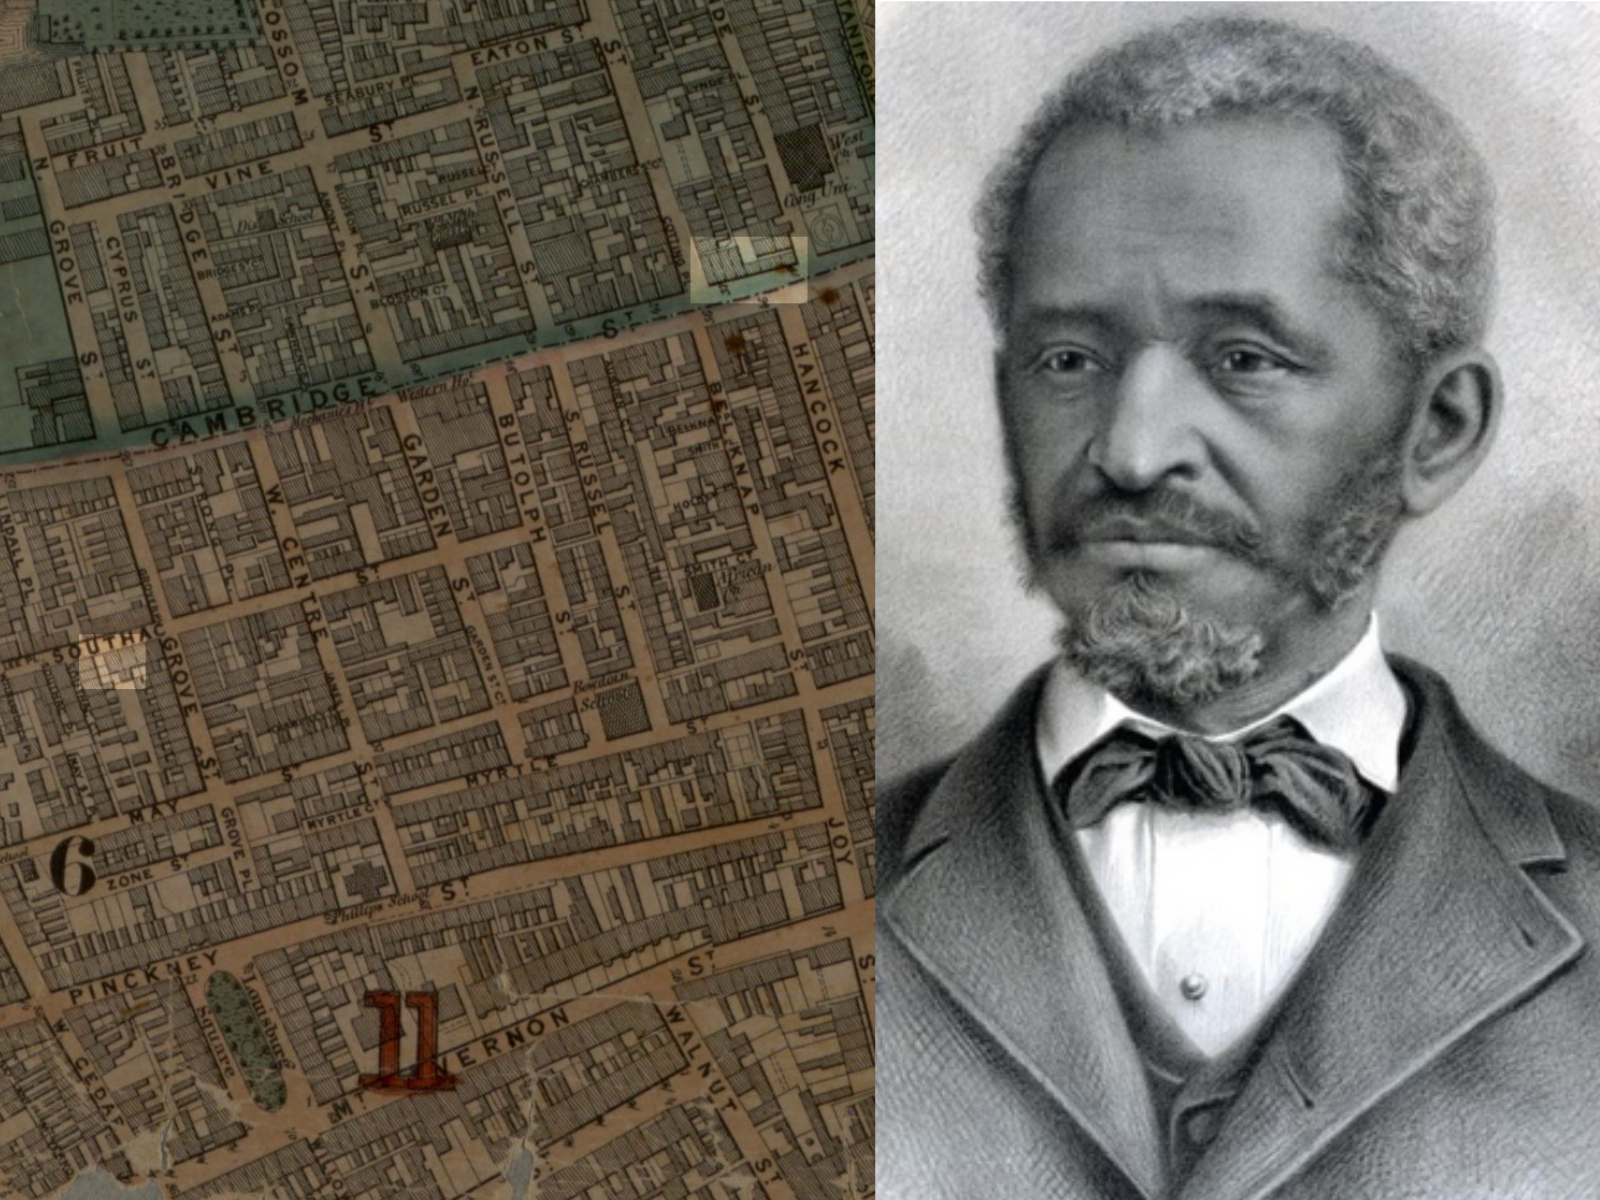 Portrait of Lewis Hayden next to a map of Beacon Hill, with his home on Southac Street highlighted, as well as William Craft's shop on Cambridge Street.